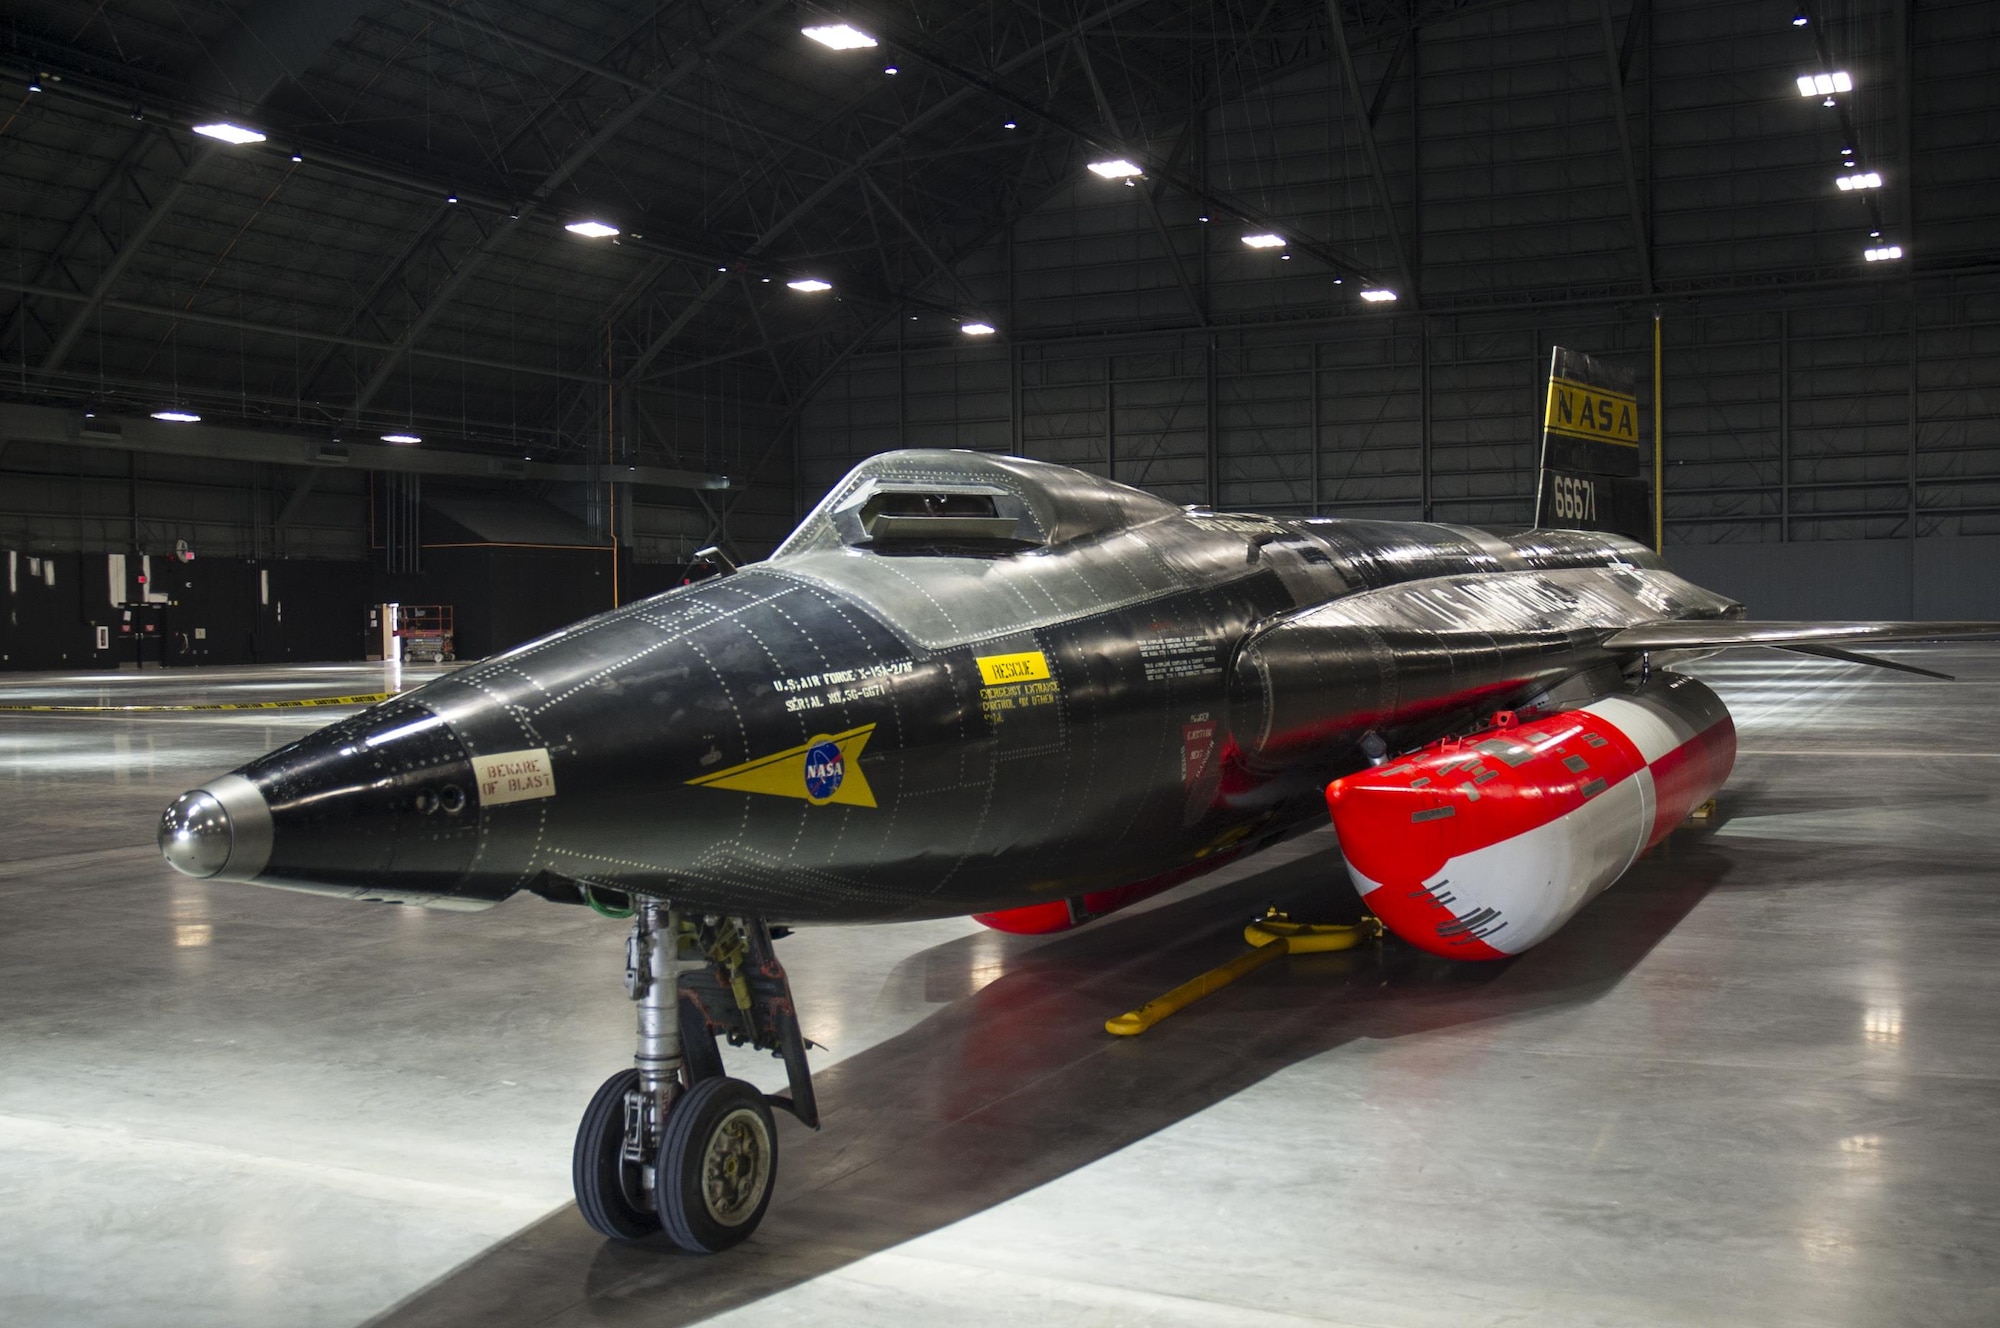 The North American X-15A-2 was moved from the restoration hangar to the museum’s new fourth building on Oct. 2, 2015. The X-15 became the first aircraft to be moved into the fourth building, where it will be part of the expanded Space Gallery. (U.S. Air Force photo by Ken LaRock)